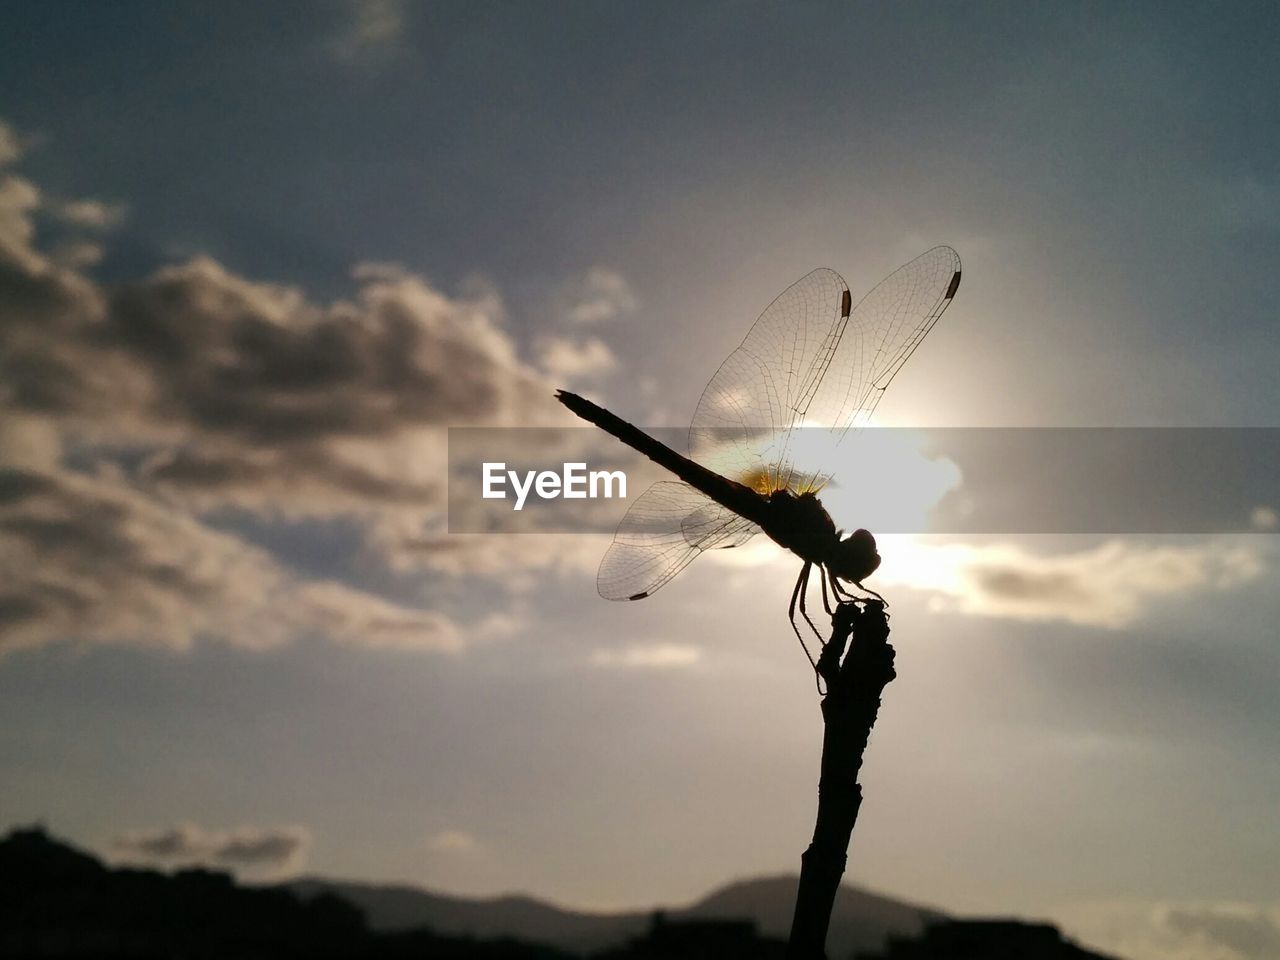 Silhouette of dragonfly